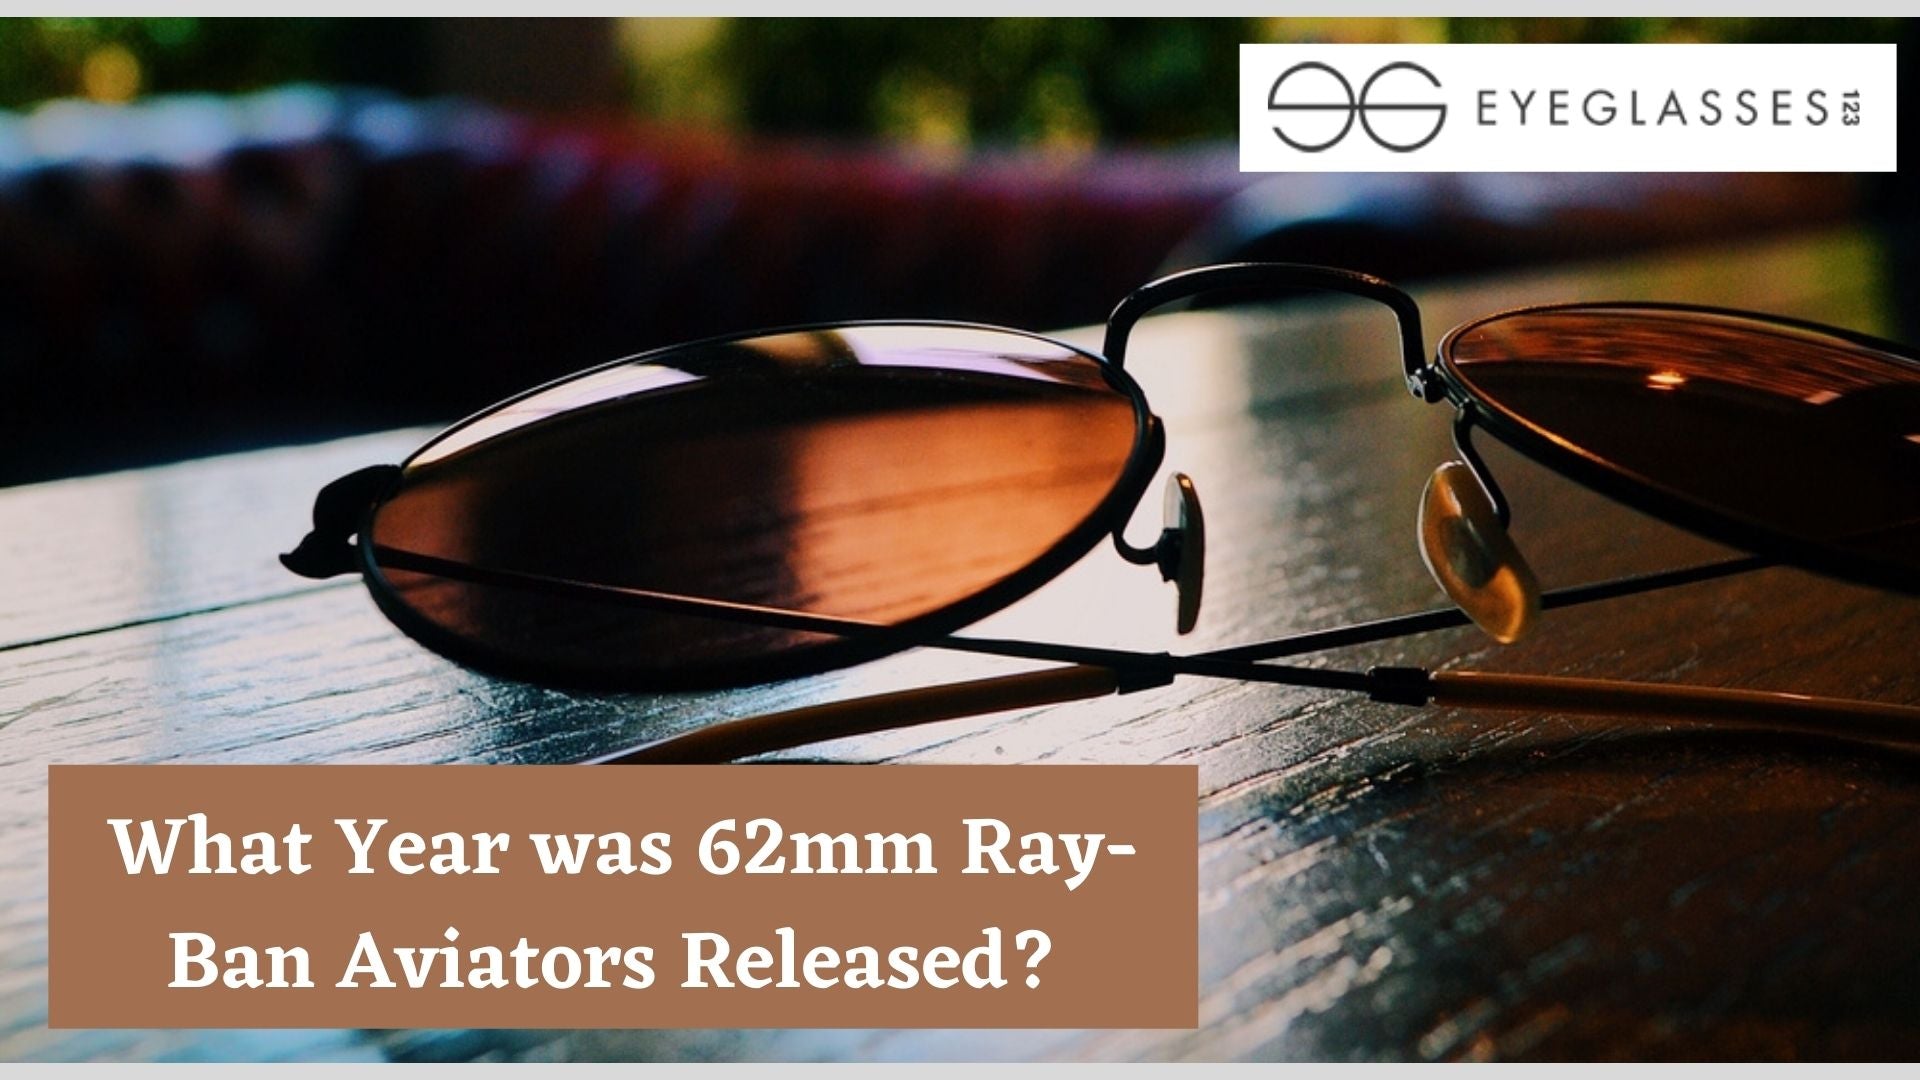 What Year was 62mm Ray-Ban Aviators Released